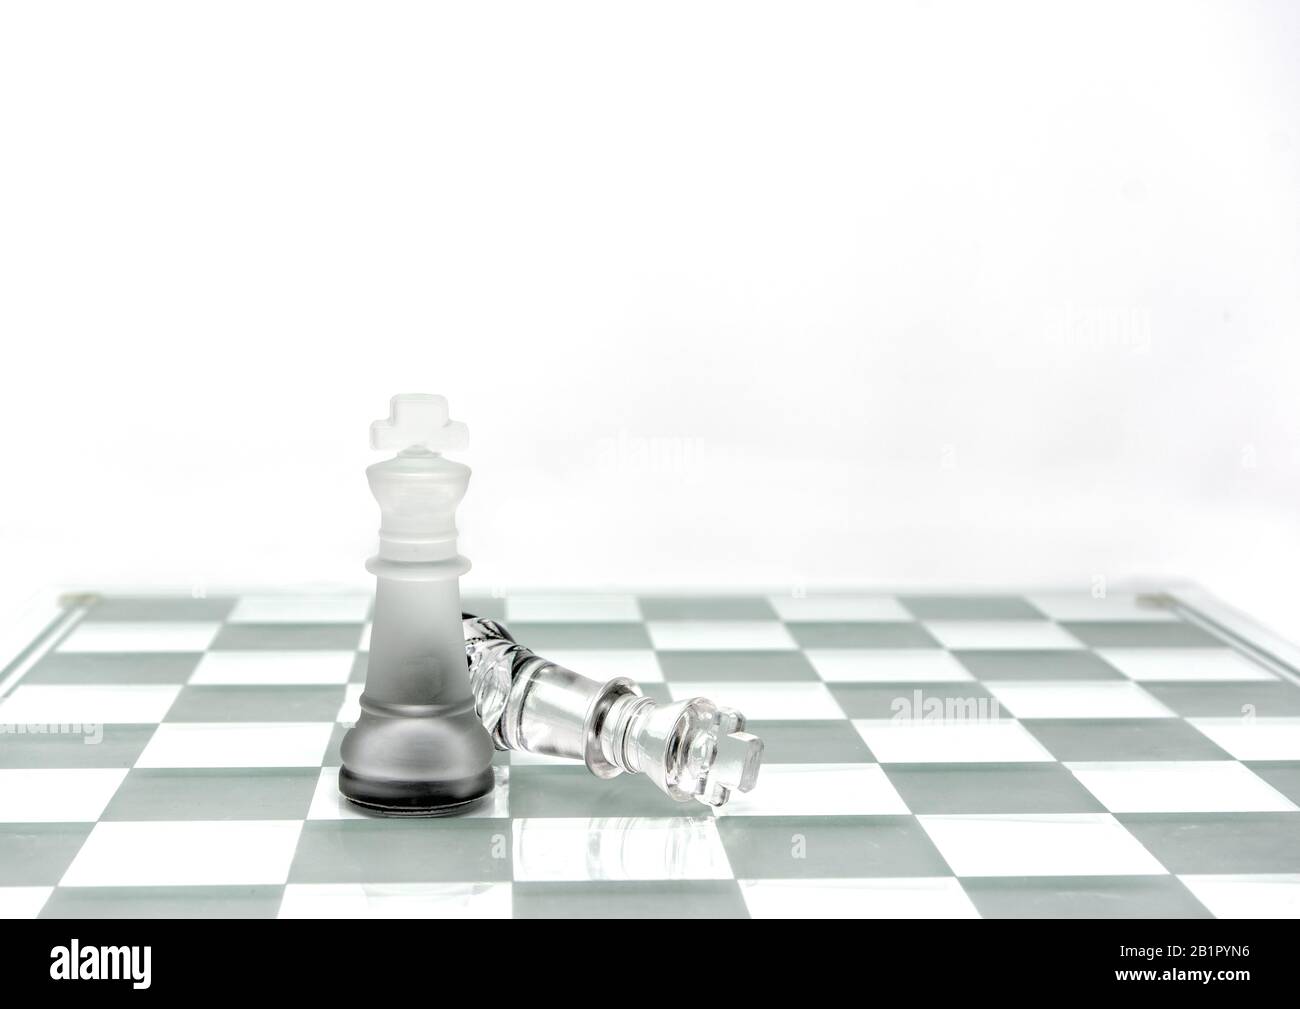 Two King chess pieces on a board in grey Stock Photo